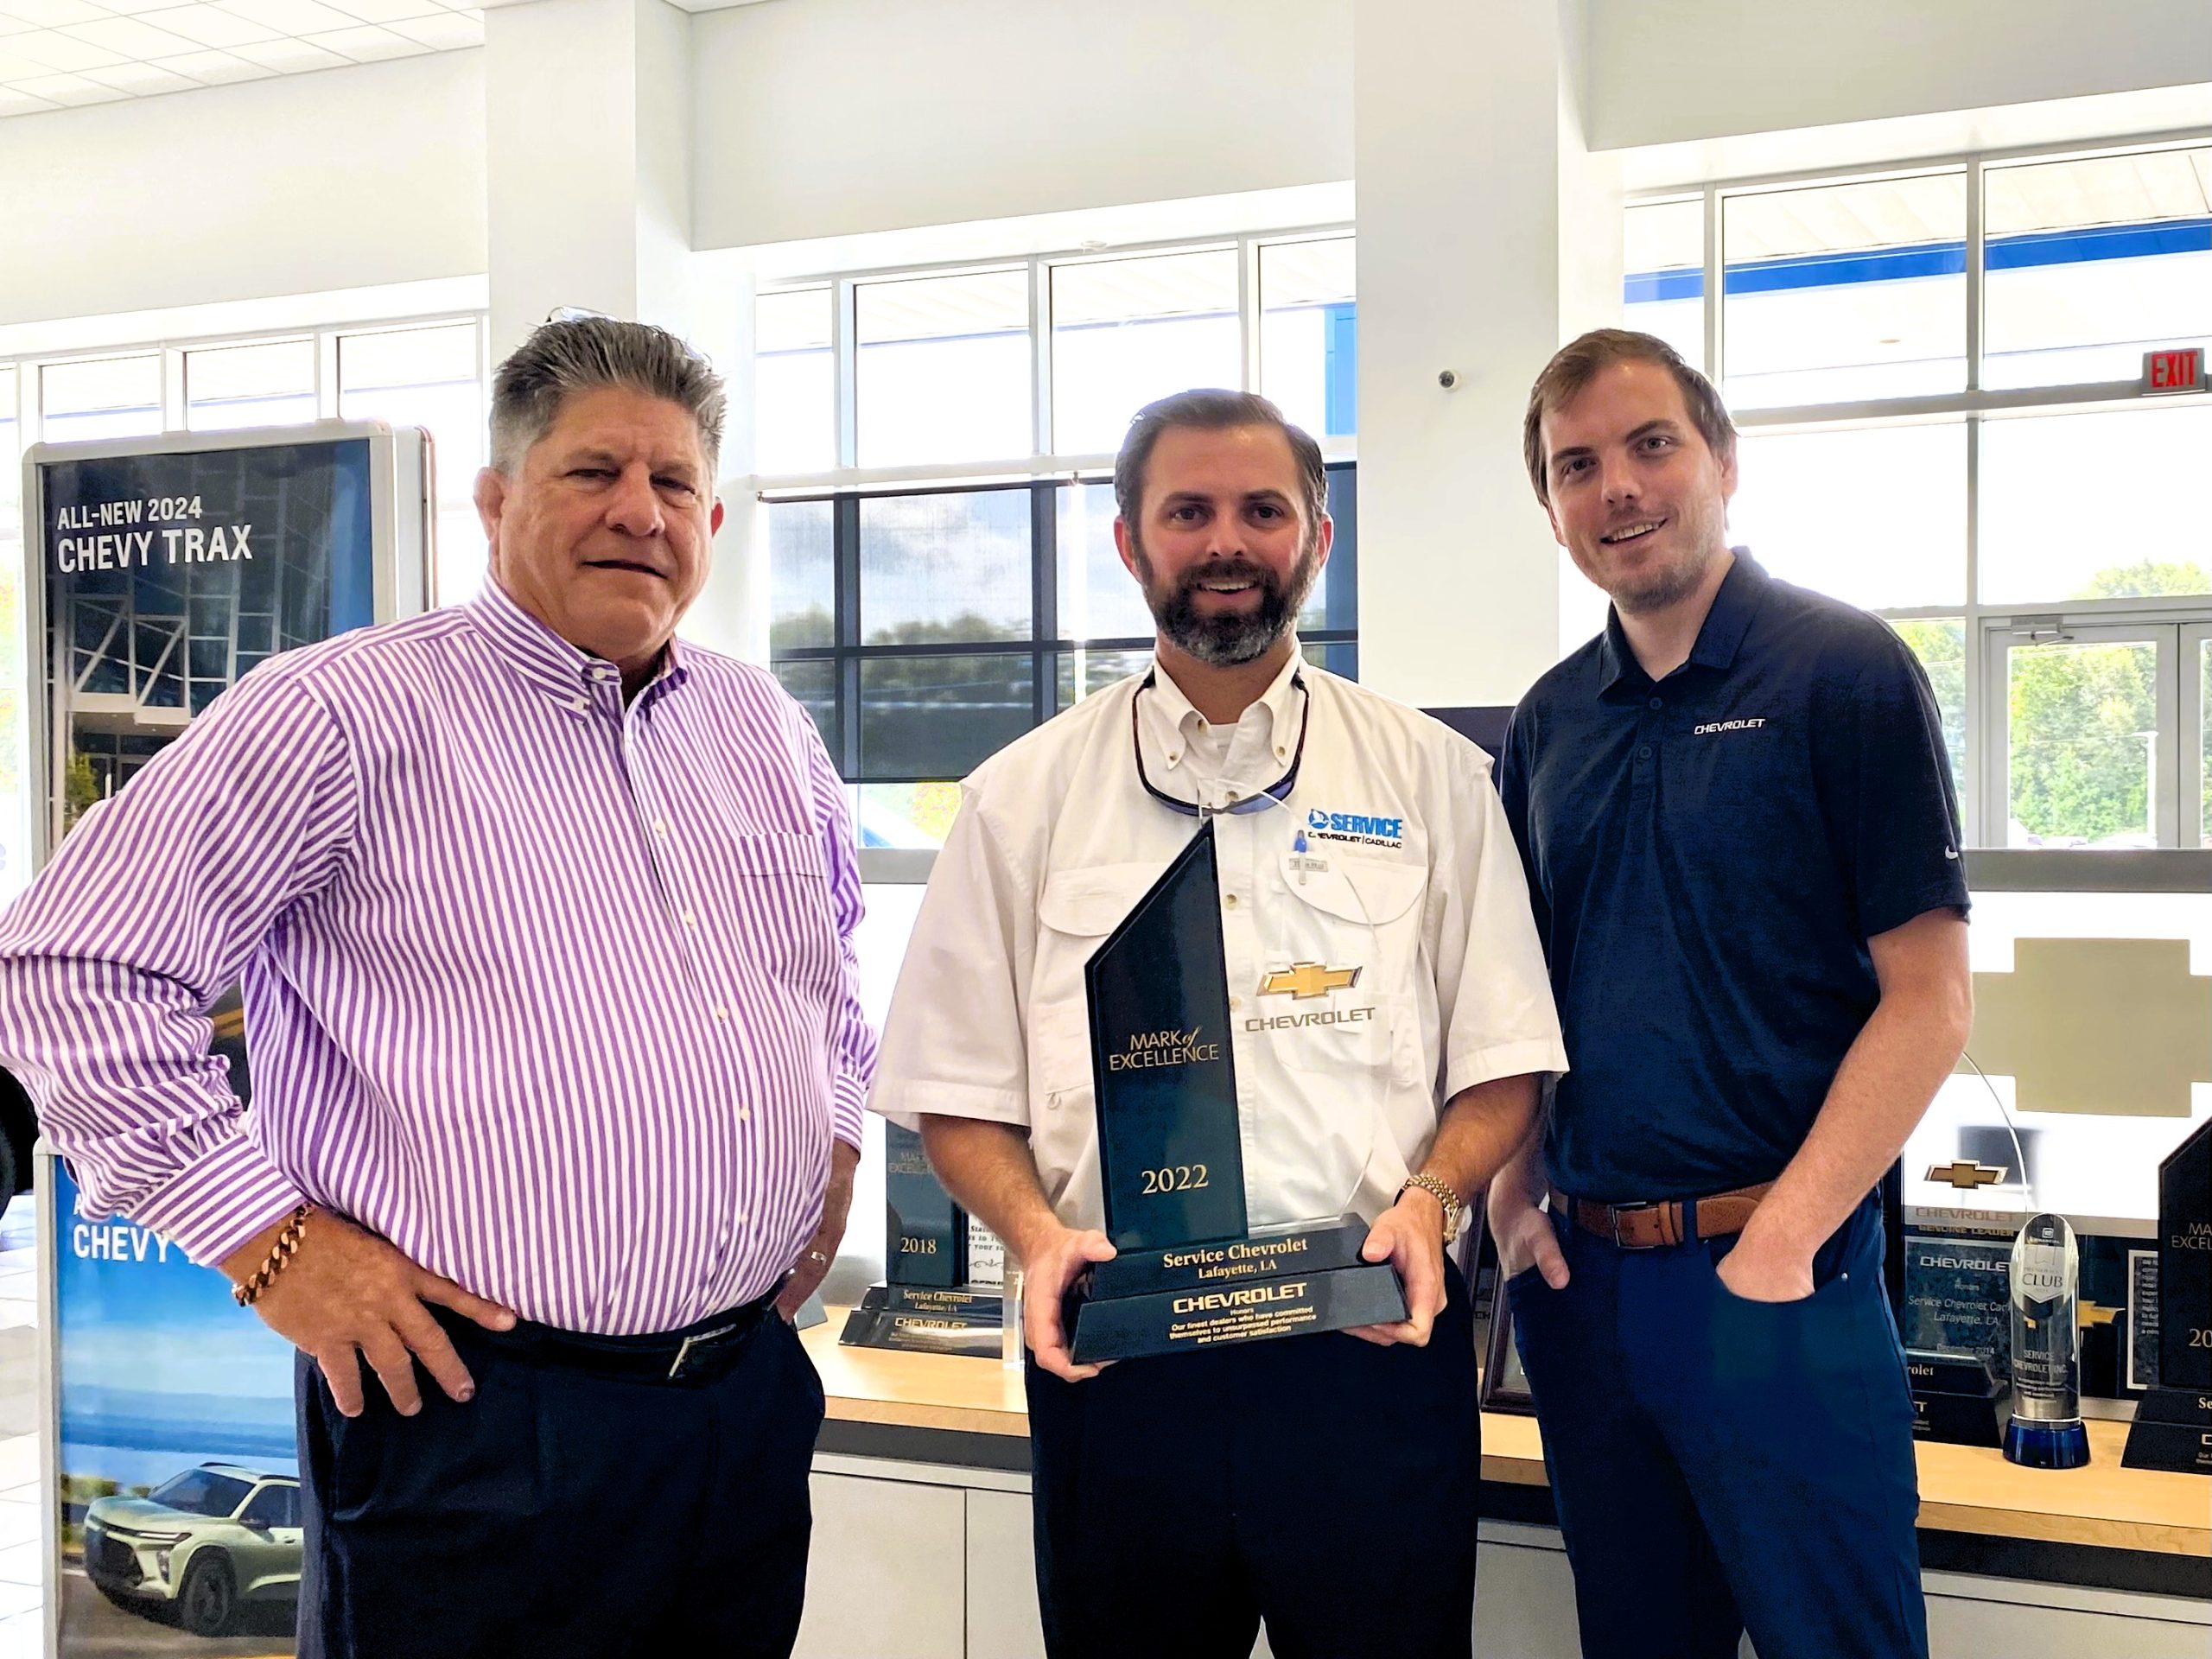 Service Chevrolet Cadillac employees receiving the Mark of Excellence Award from General Motors in 2022